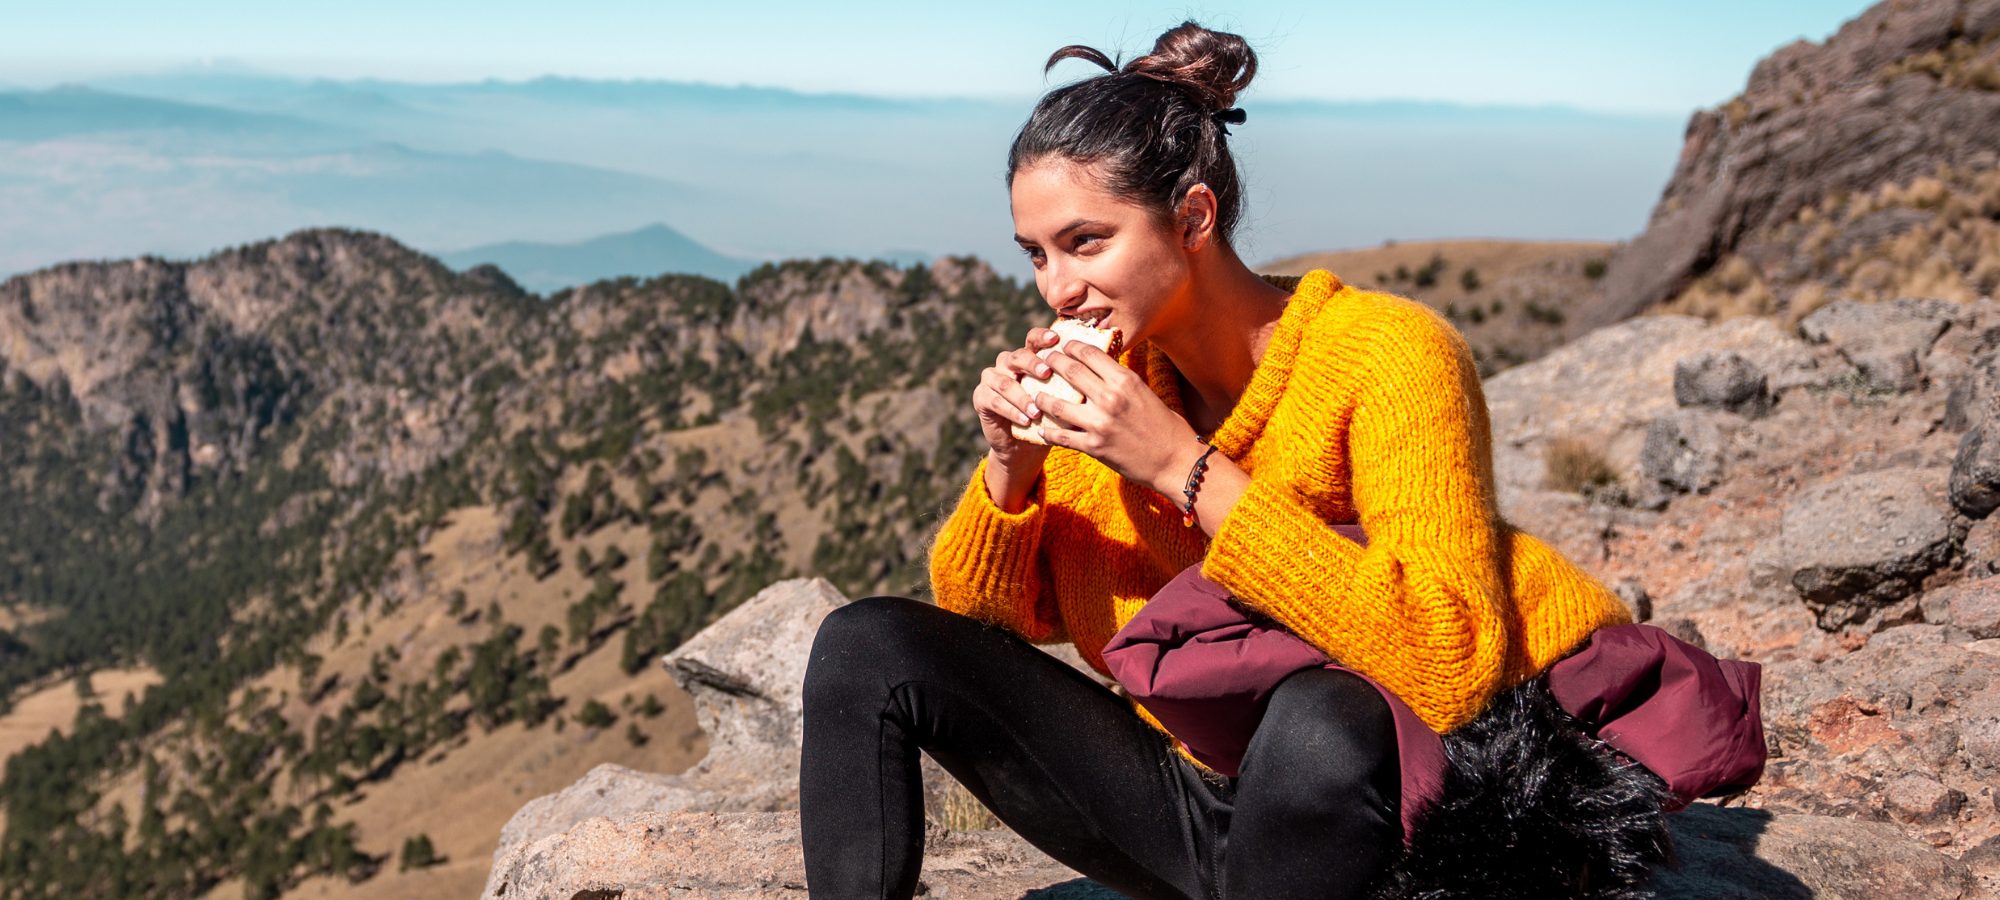 Woman eating lunch on hike